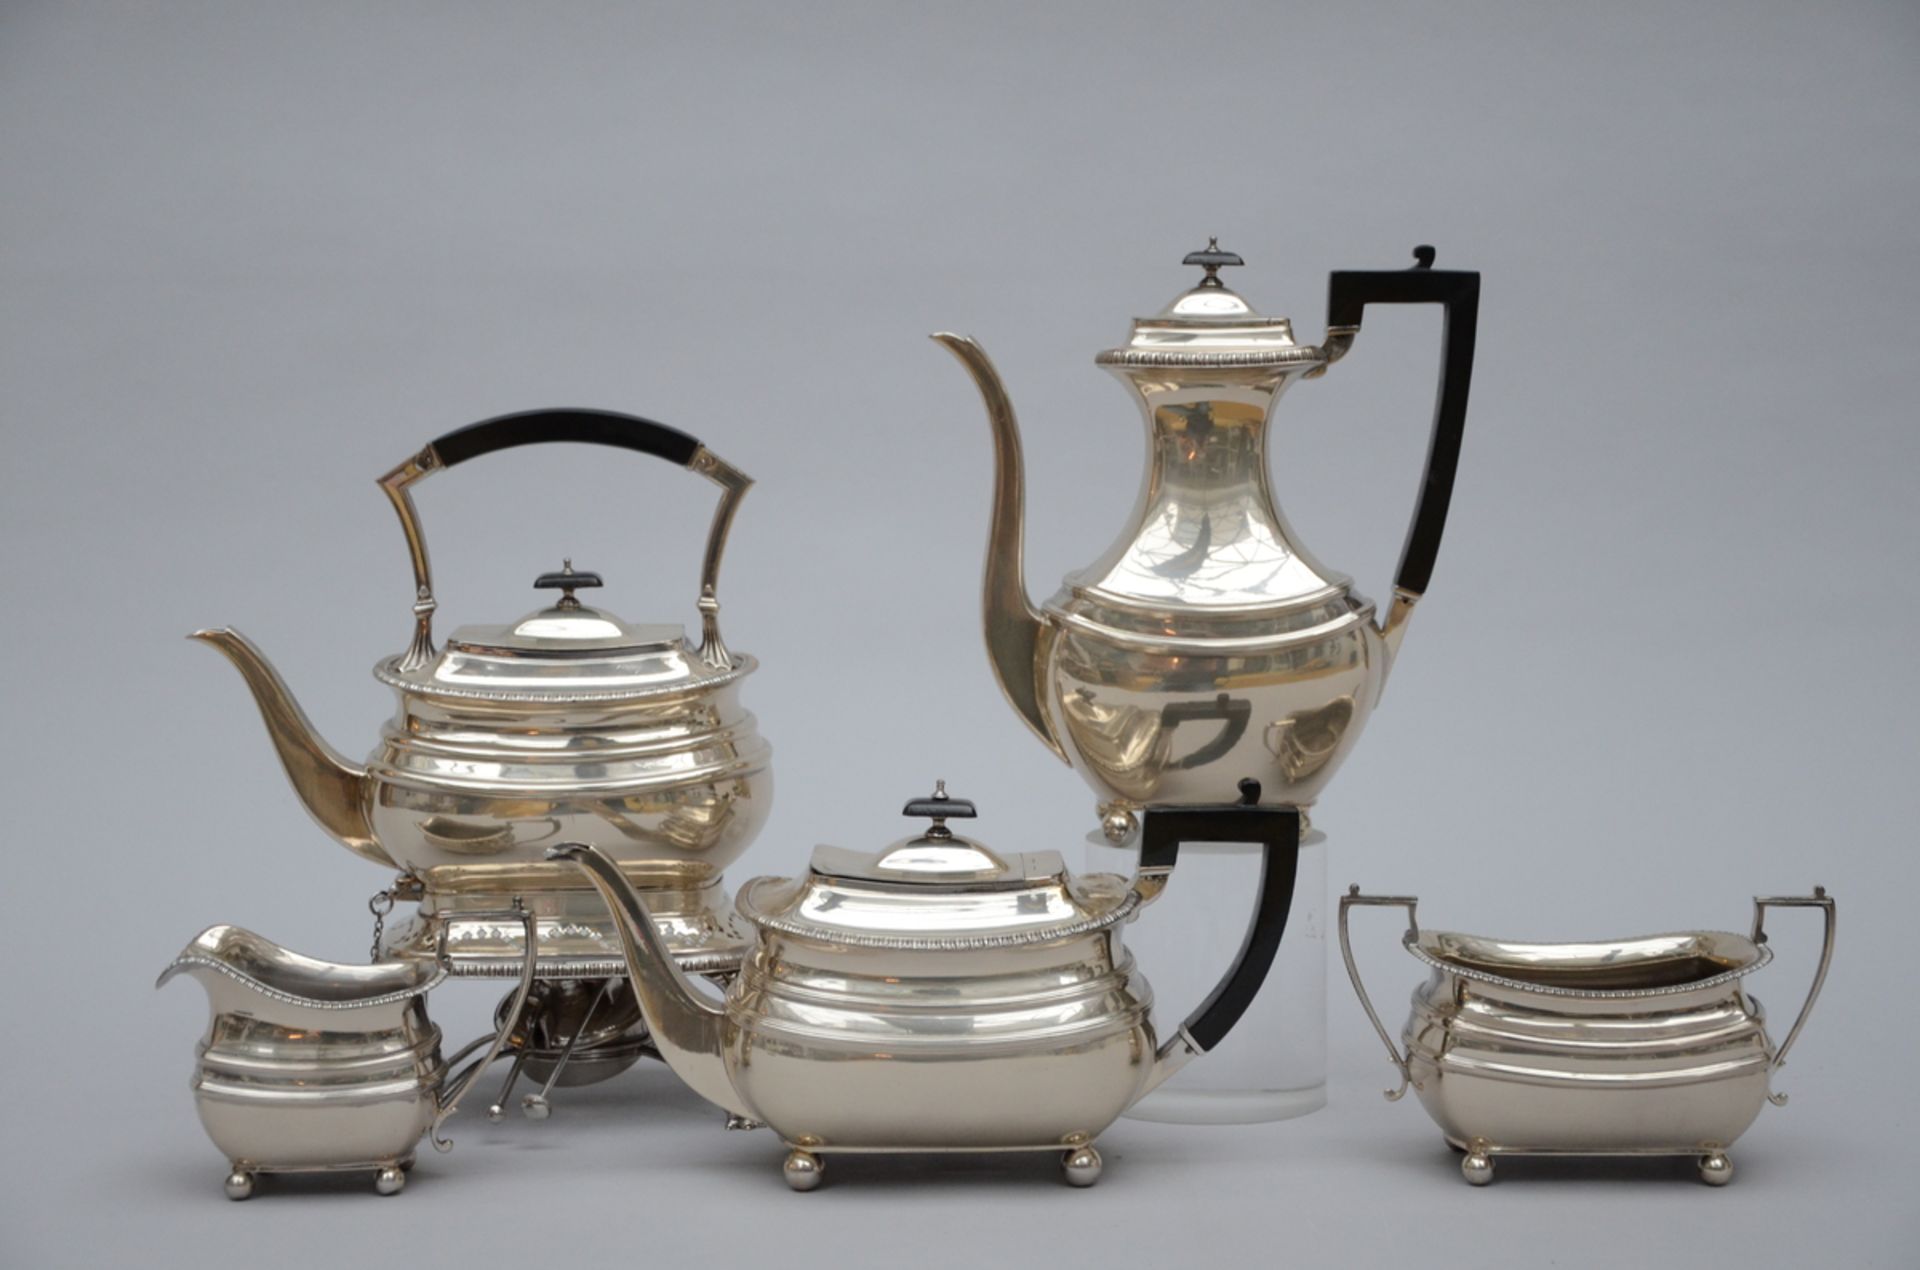 A five-piece coffee set in Sterling silver, United Kingdom - Image 2 of 6